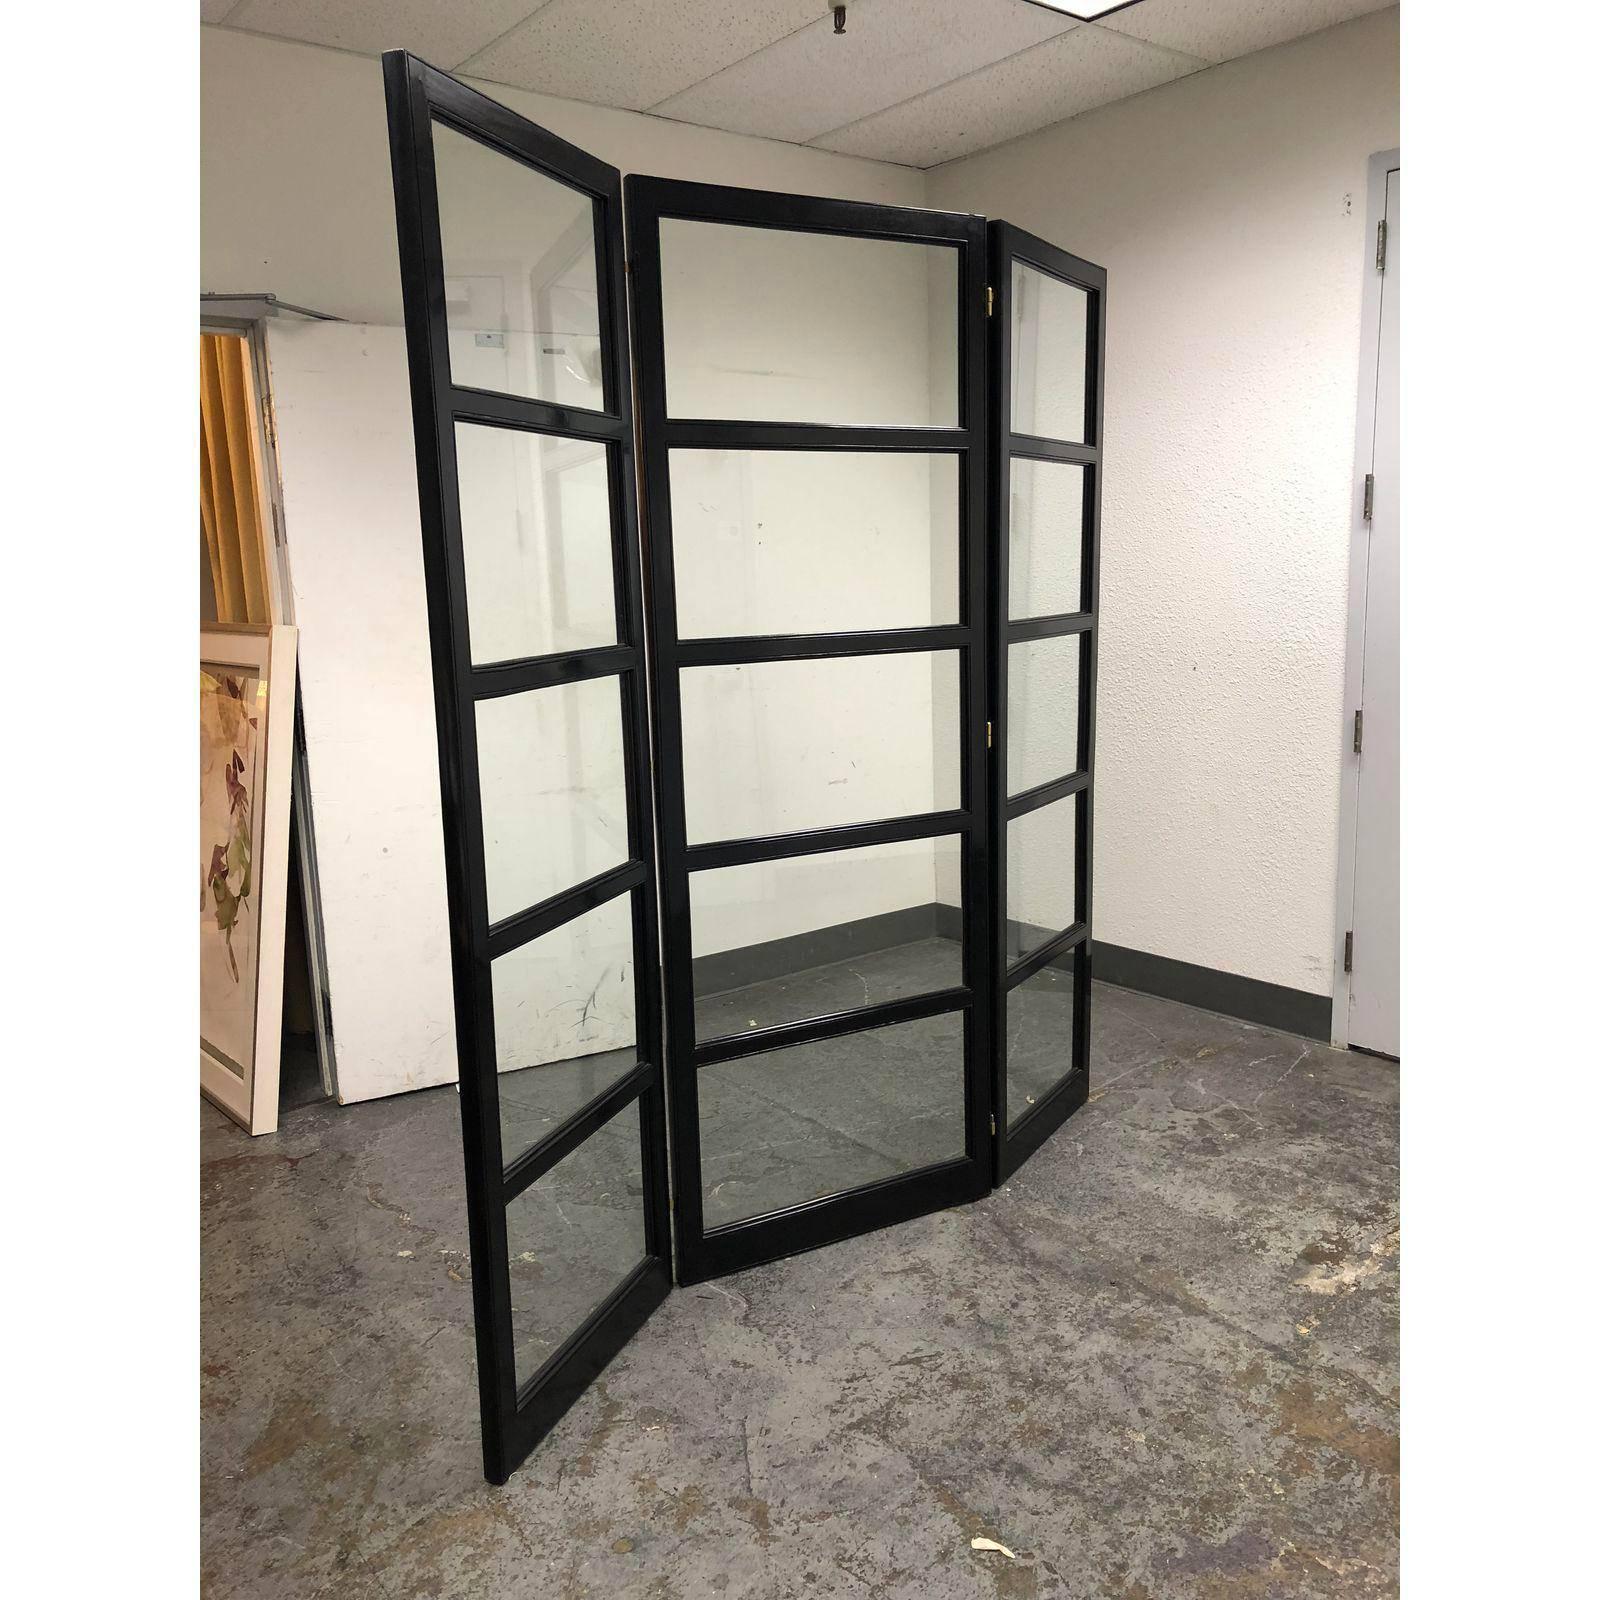 A three panel folding screen. The frame has a dar ebonized finish which really set of the clear glass panels. 
Original Price: $3,277.50.
   